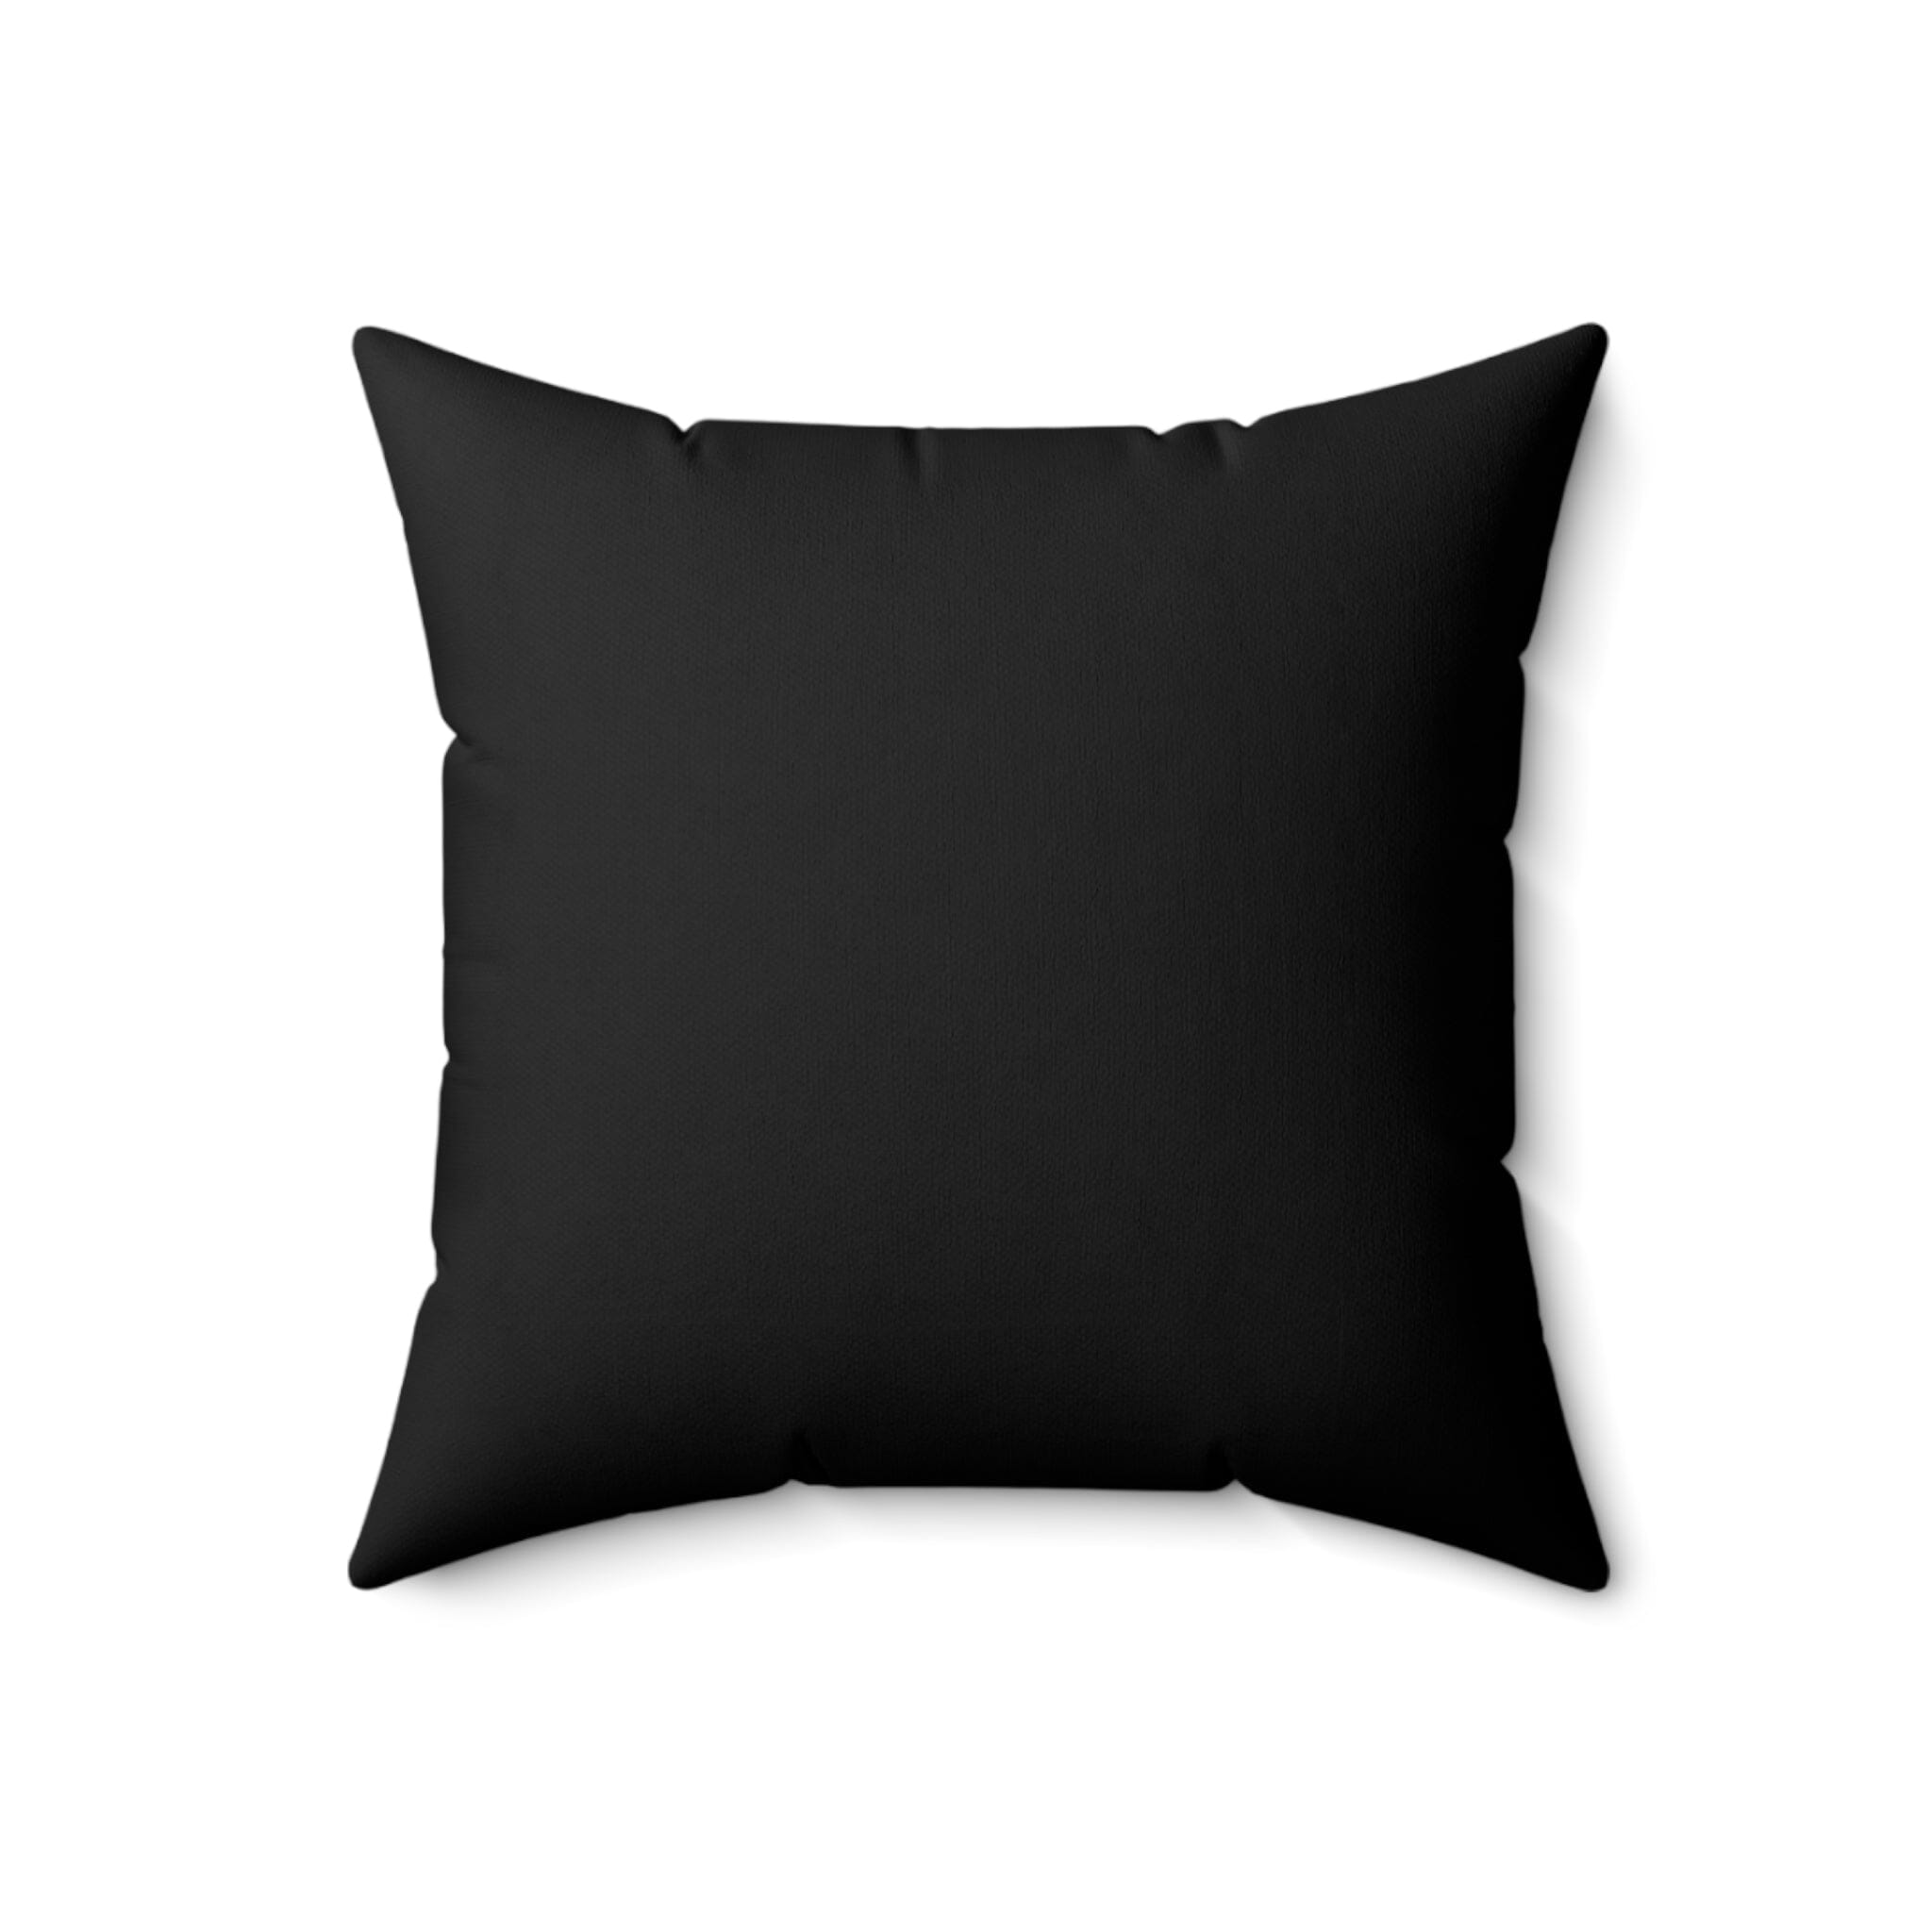 Autistic AF Pillow Home Decor The Autistic Innovator 